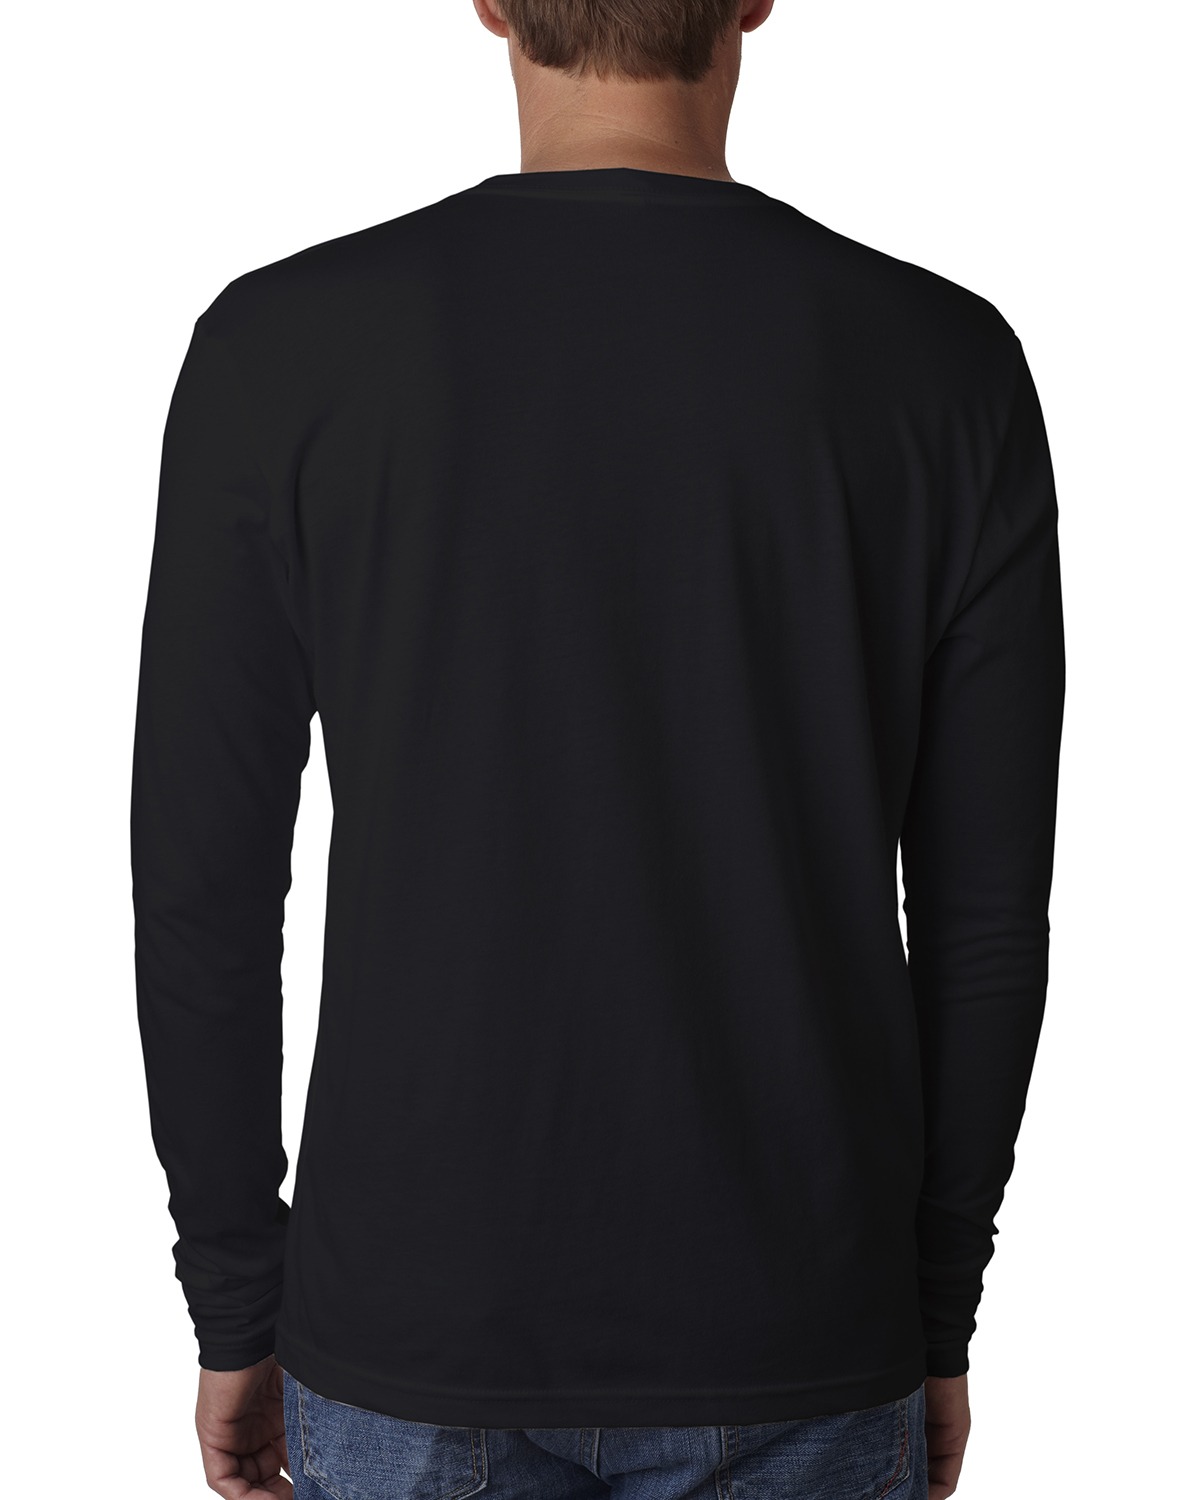 Next Level N3601 Men's Premium Fitted Long Sleeve Crew Tee